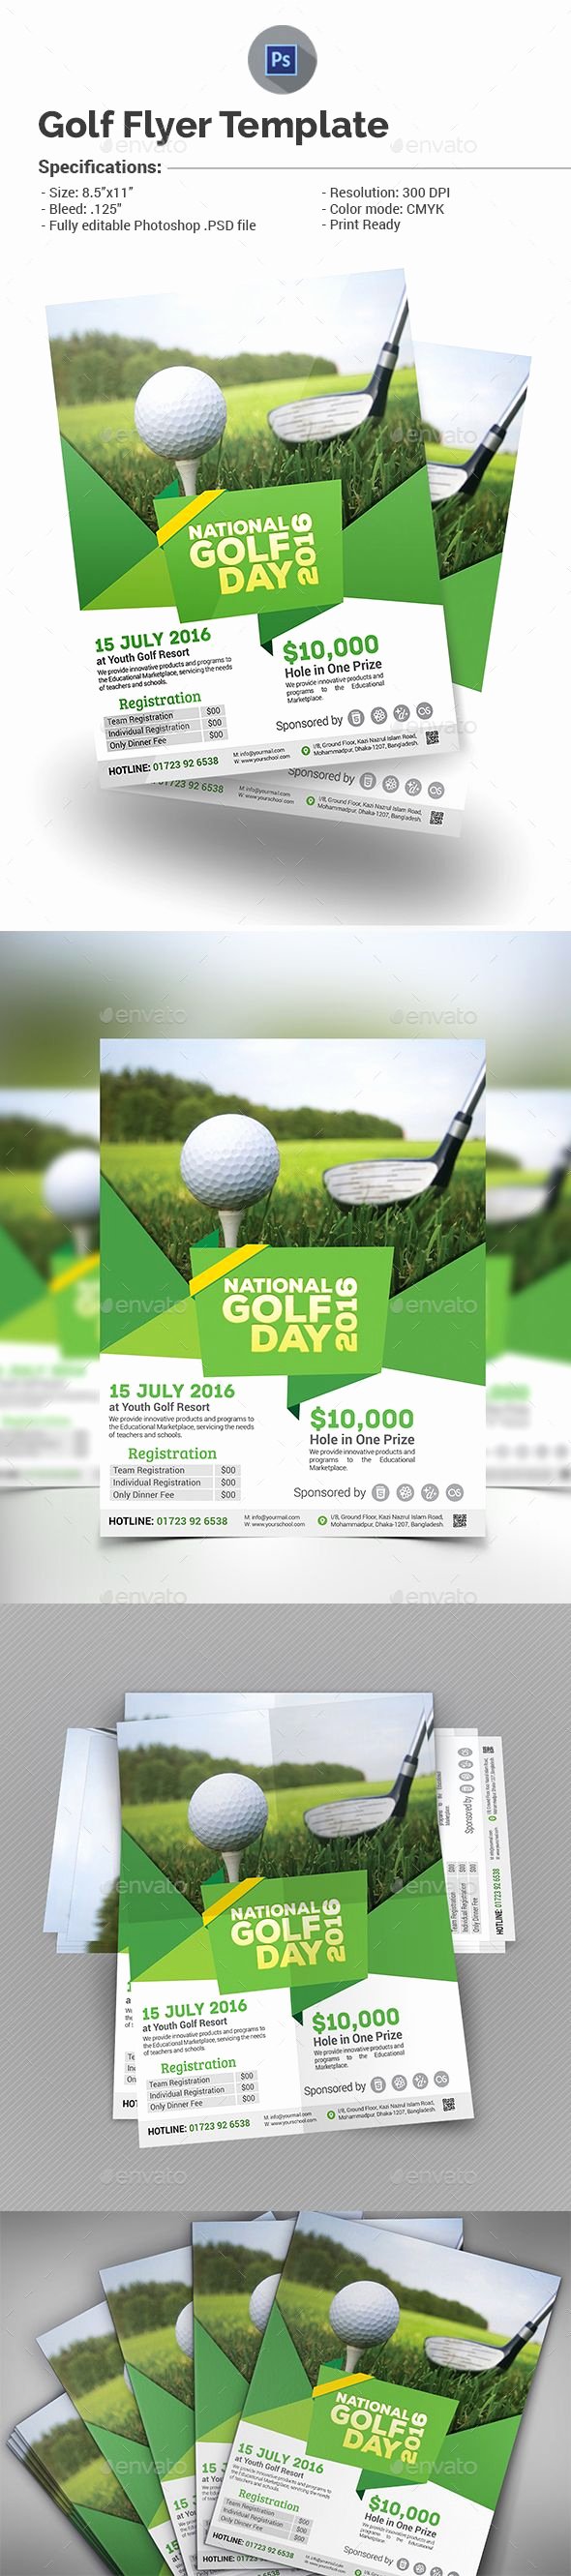 Golf Flyer Template Free Best Of 17 Images About Golf On Pinterest